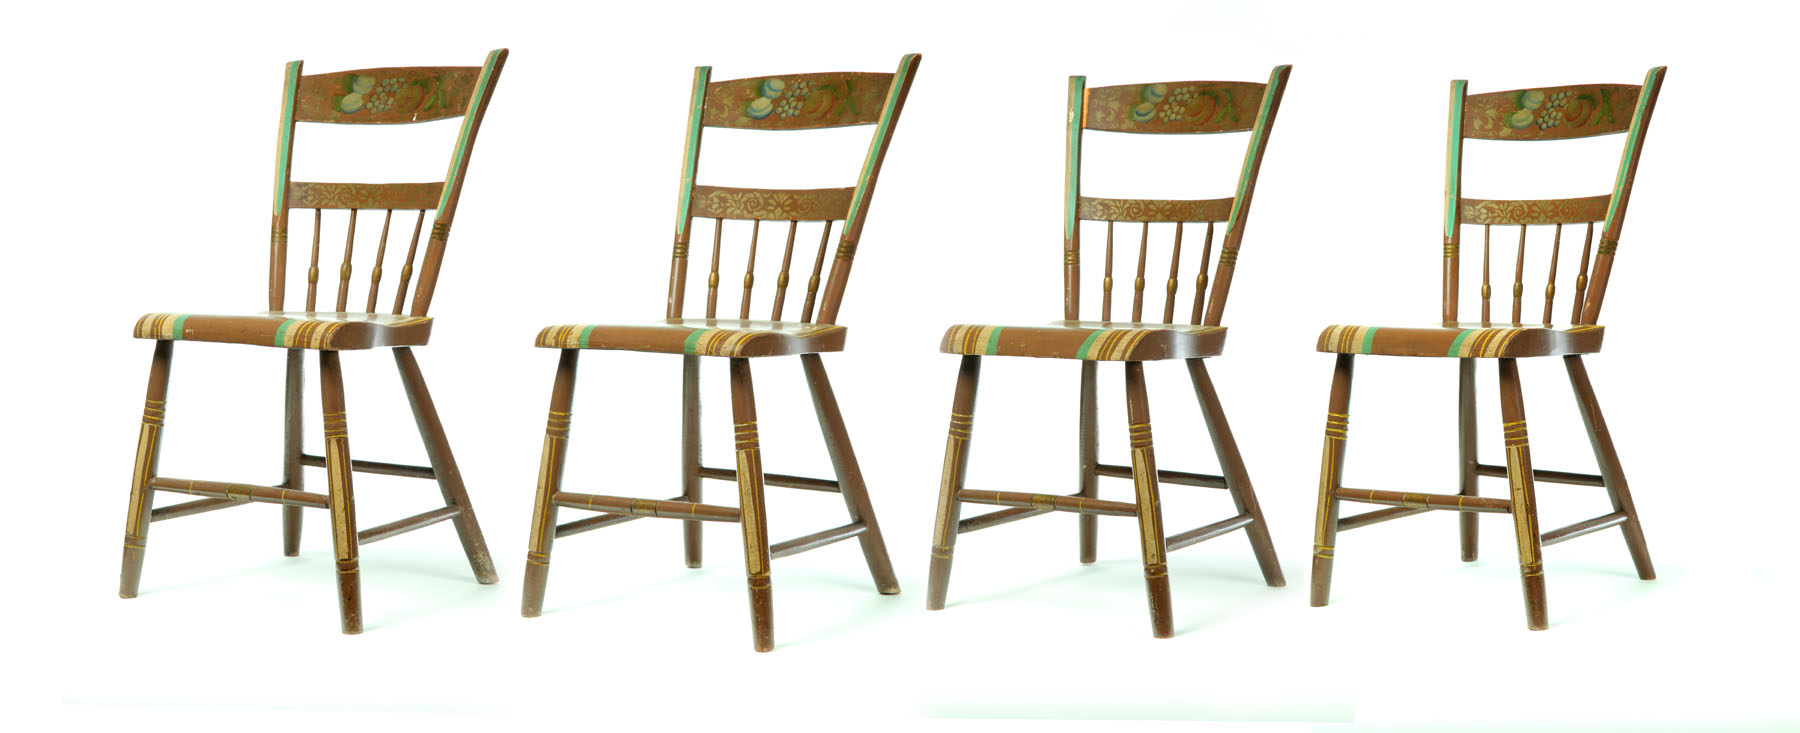 SET OF SIX DECORATED SIDE CHAIRS  11714b